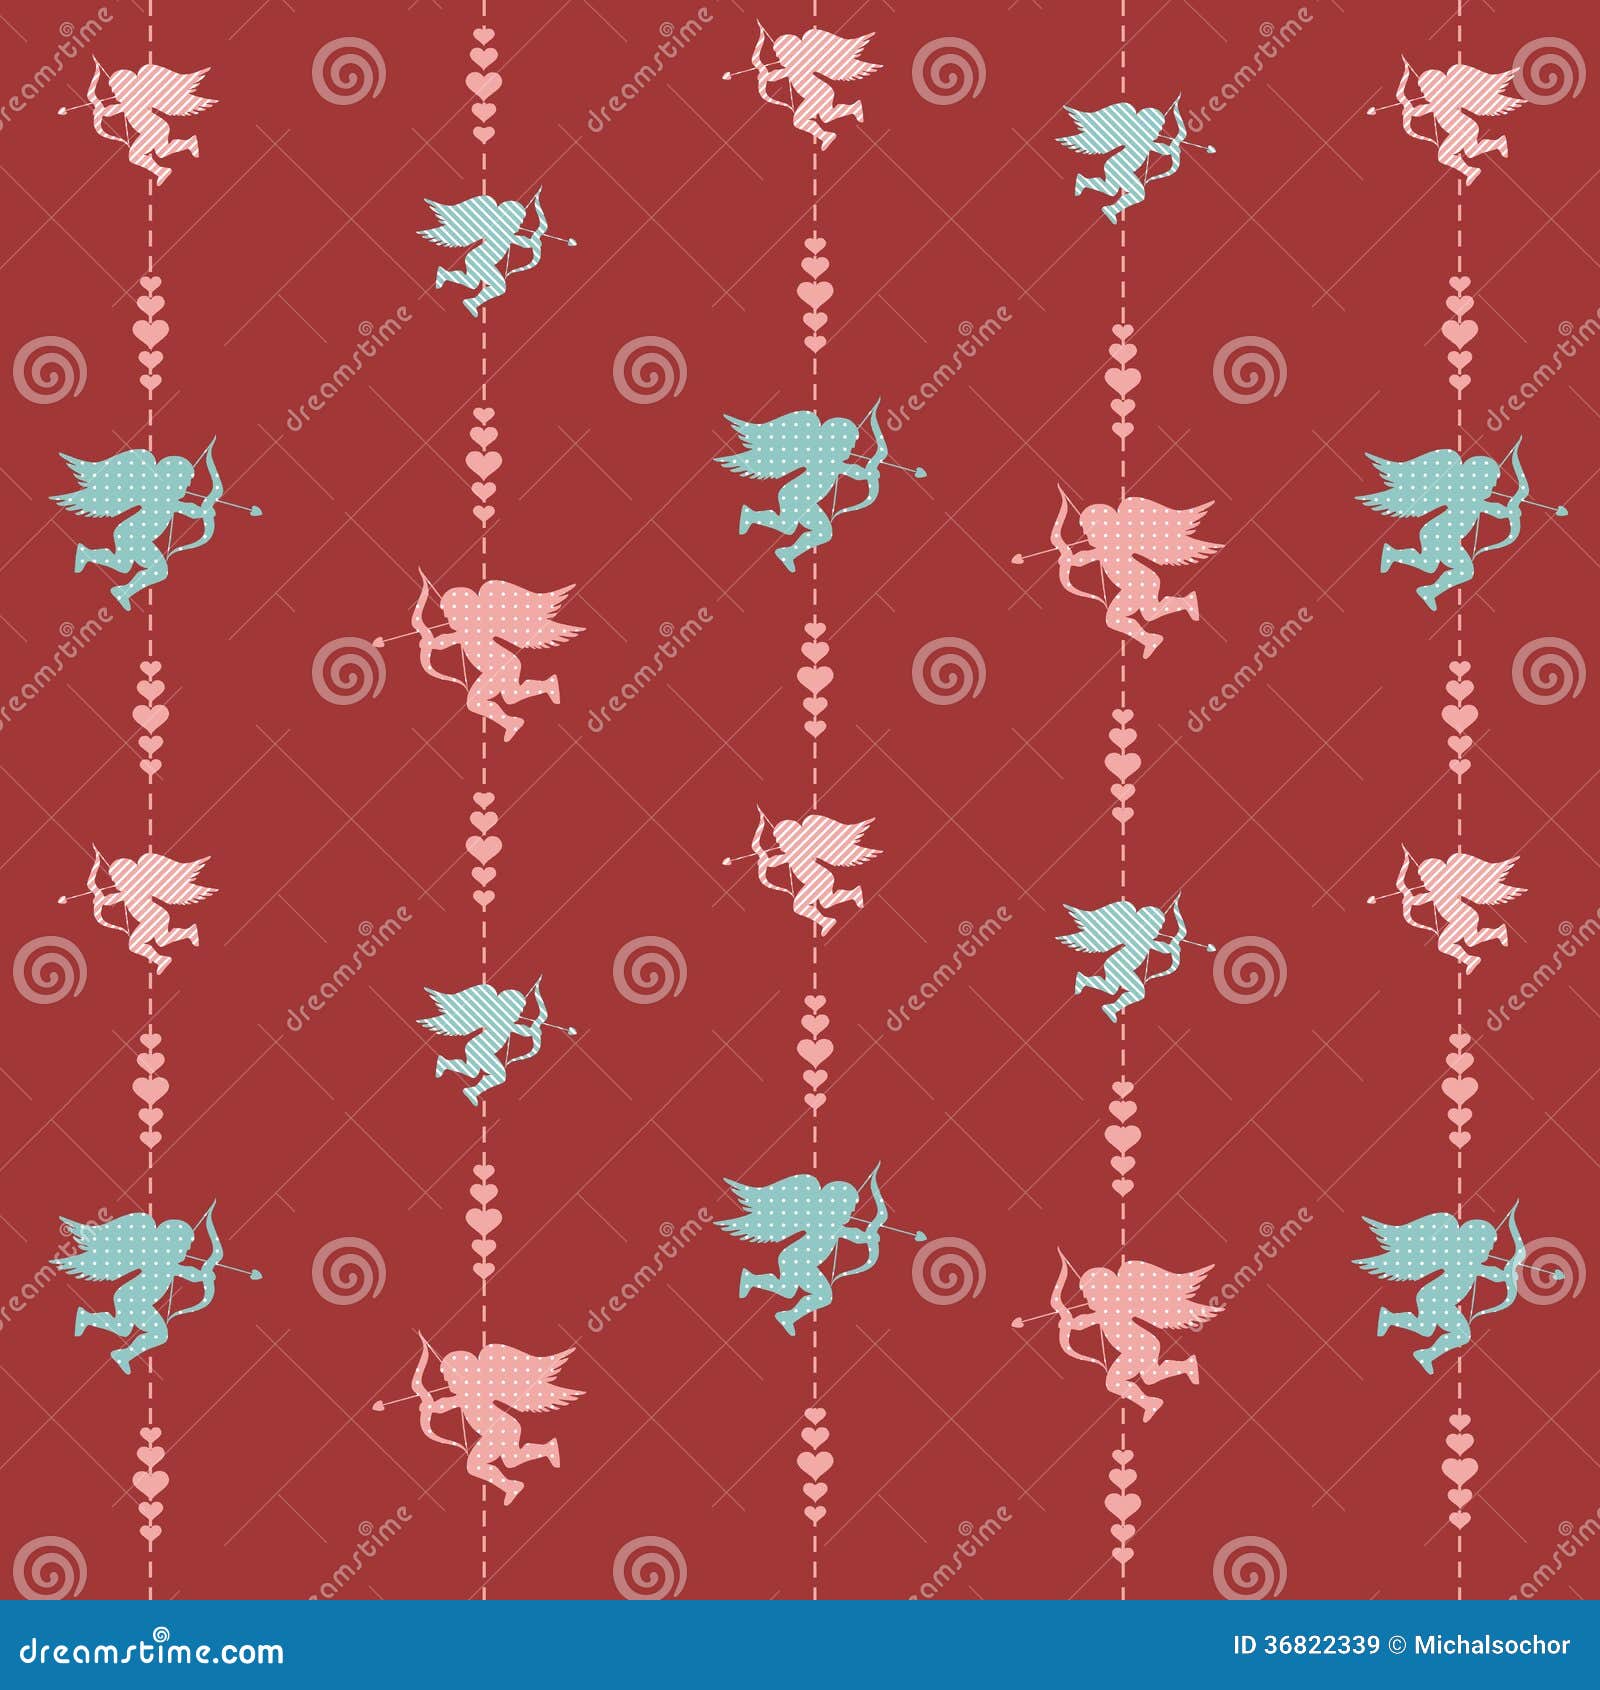 cute valentine seamless pattern with silhouettes of amor